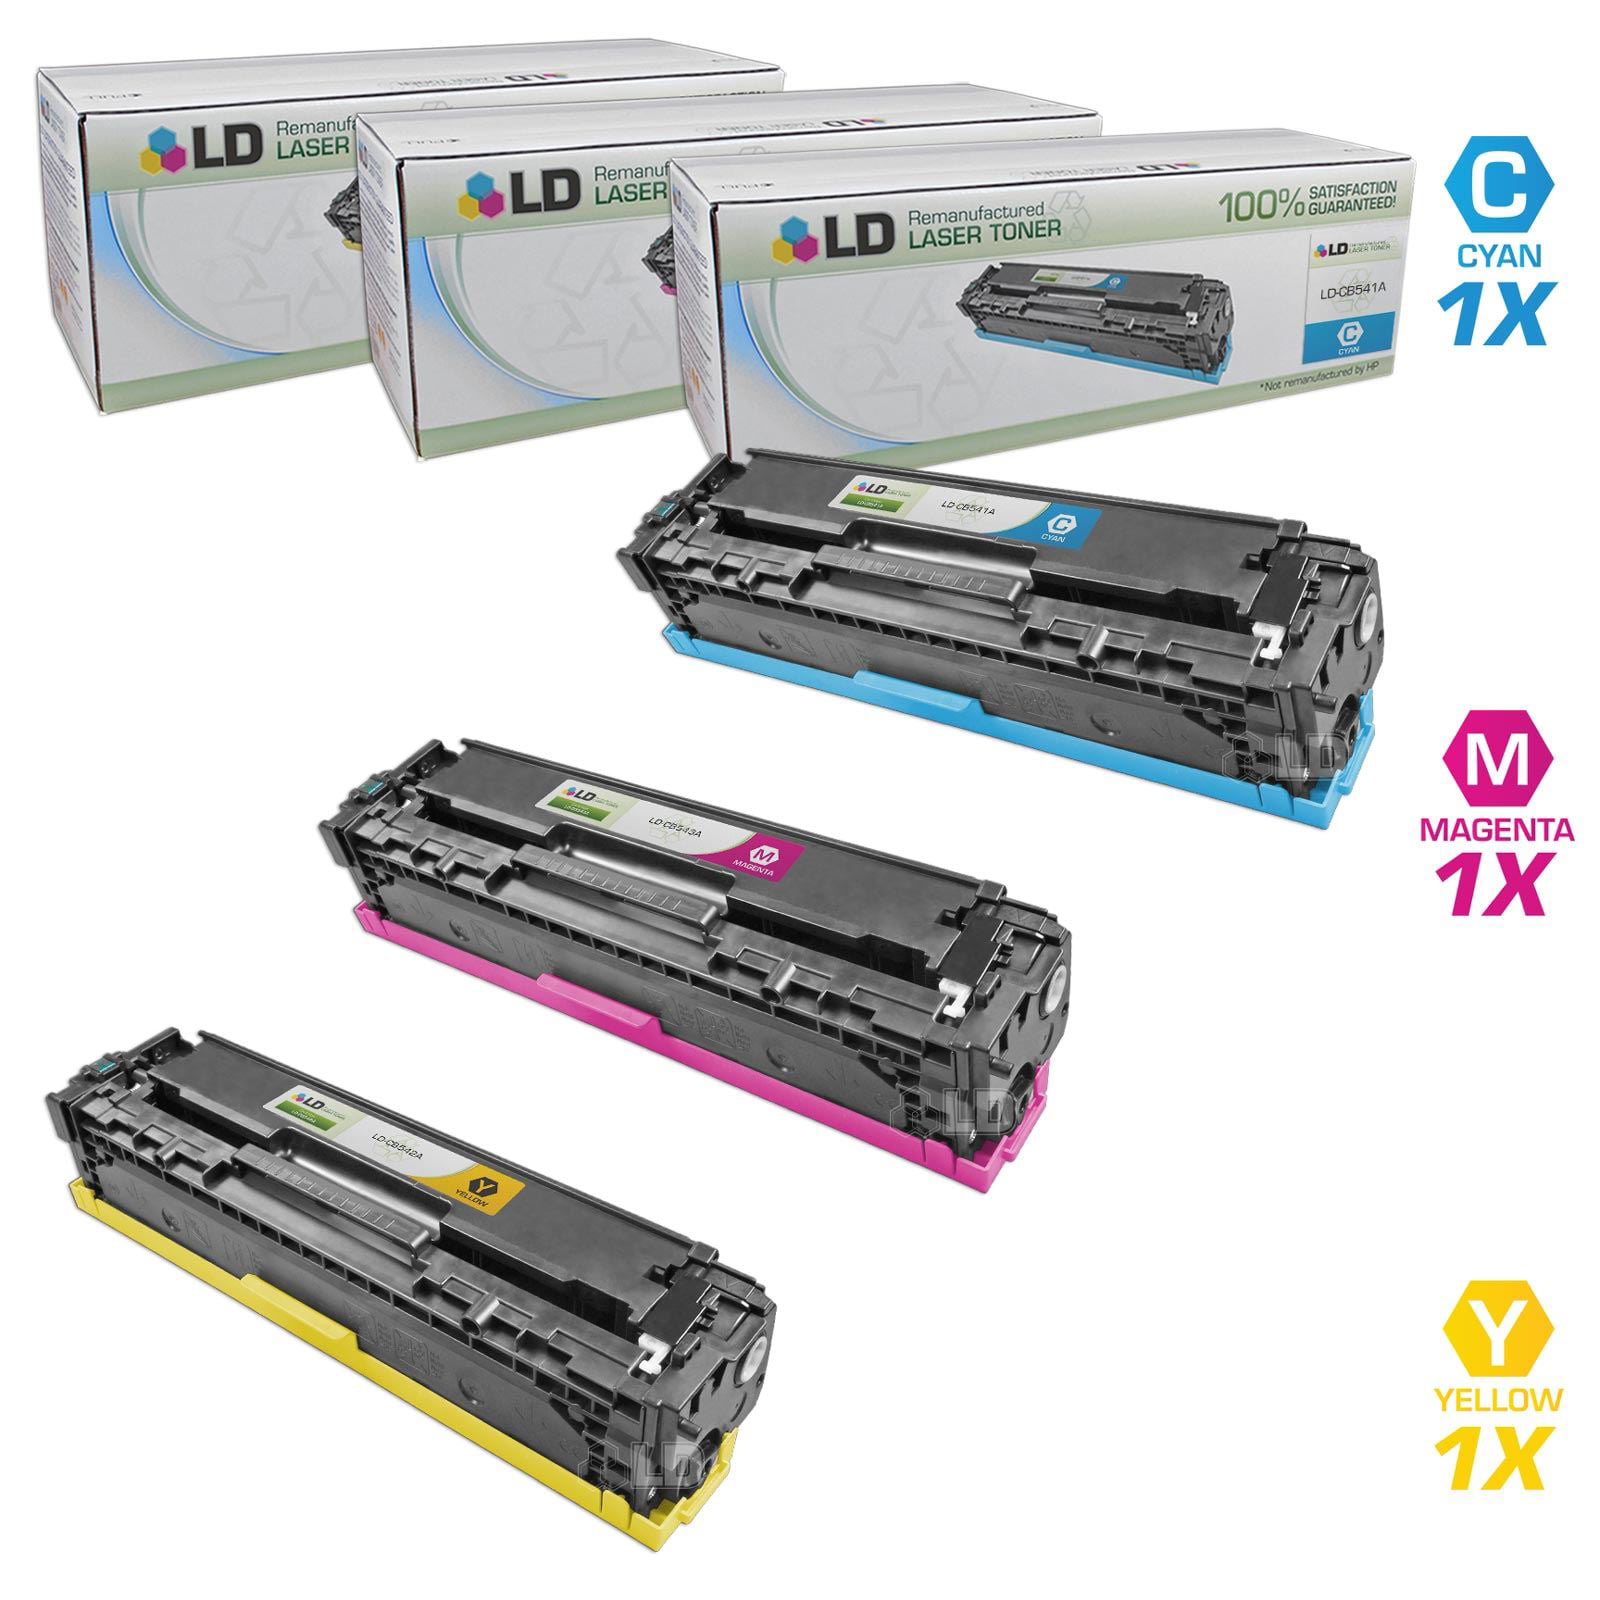 LD Remanufactured Replacements for HP 125A Toners 2 Bk 1 Cyan 1 Magenta 1 Yellow 